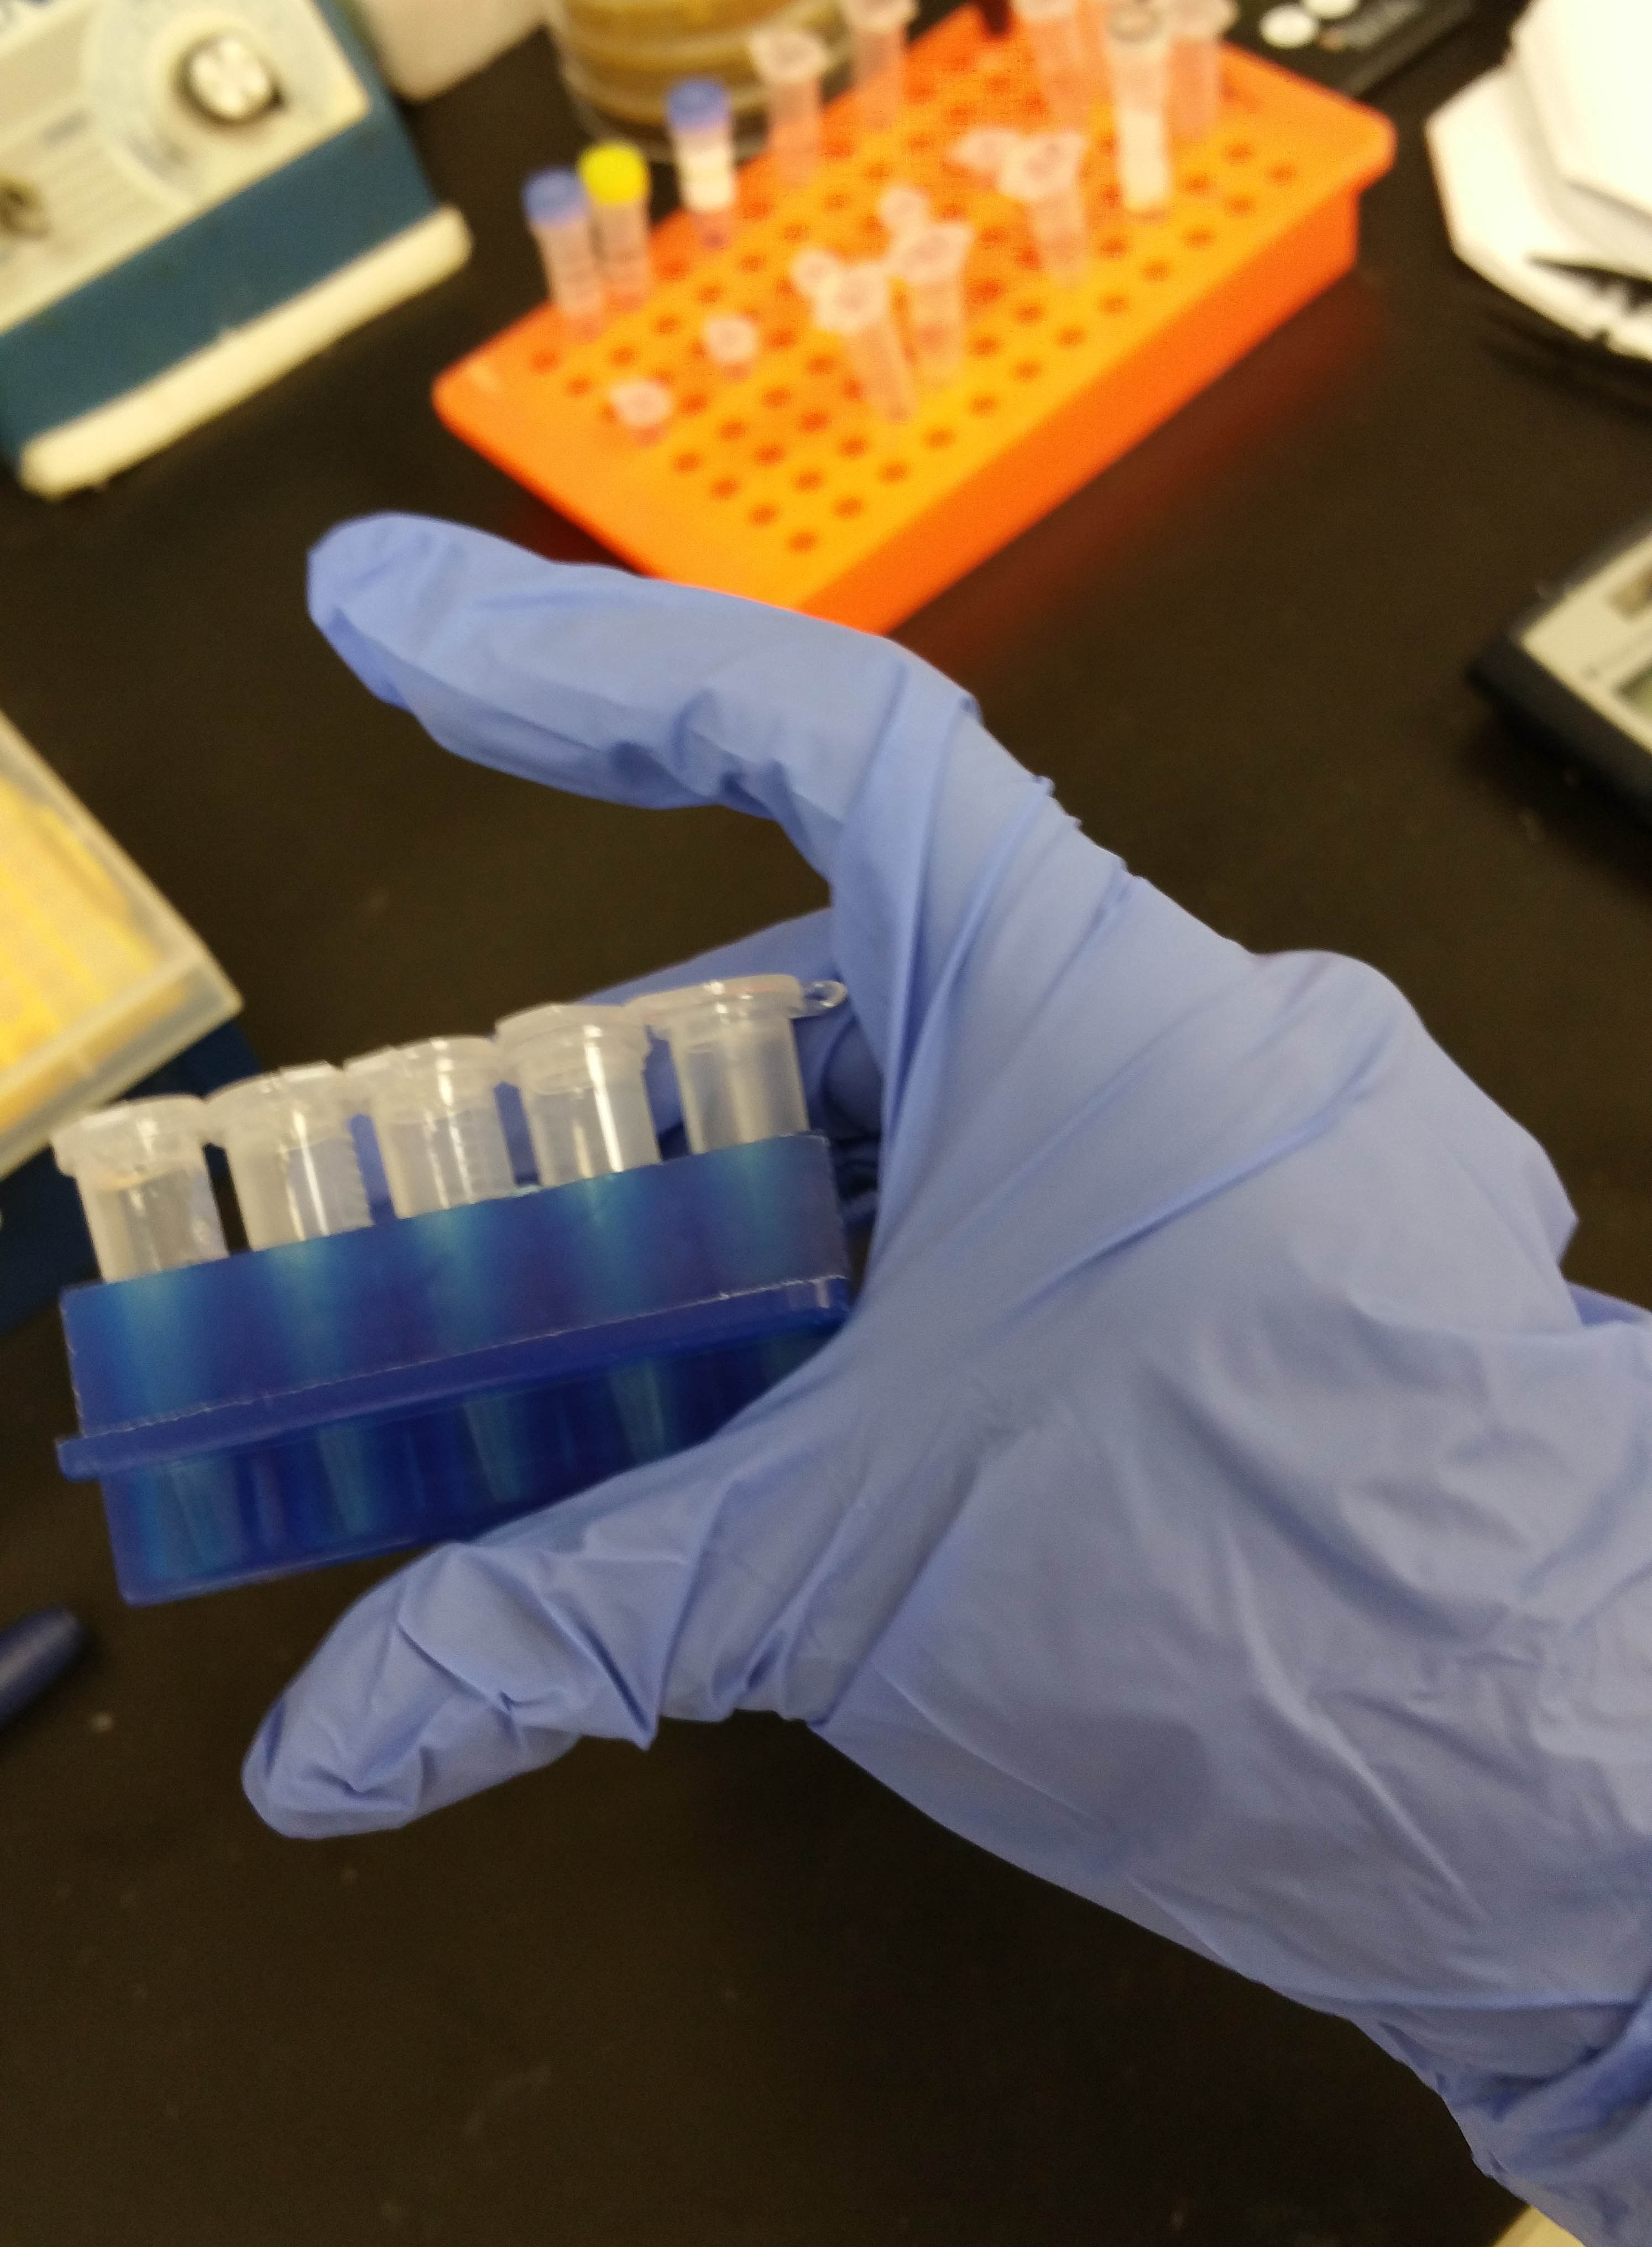 25 Real Lab Hacks from Researchers Like You - Invert multiple tubes at once using your tube rack